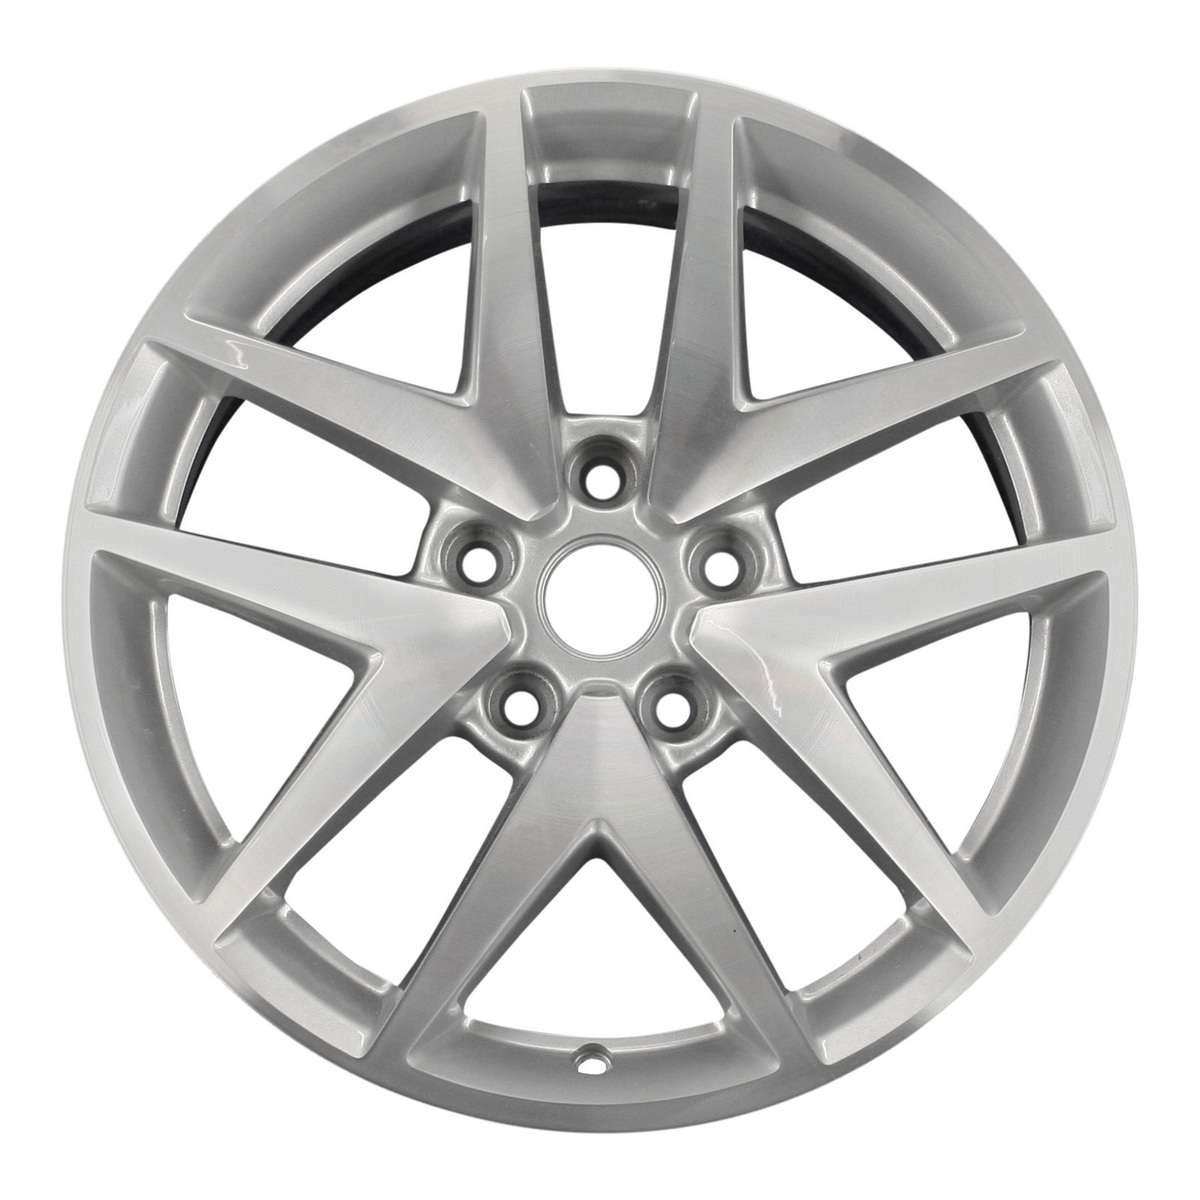 2012 Ford Fusion New 17" Replacement Wheel Rim RW3797MS